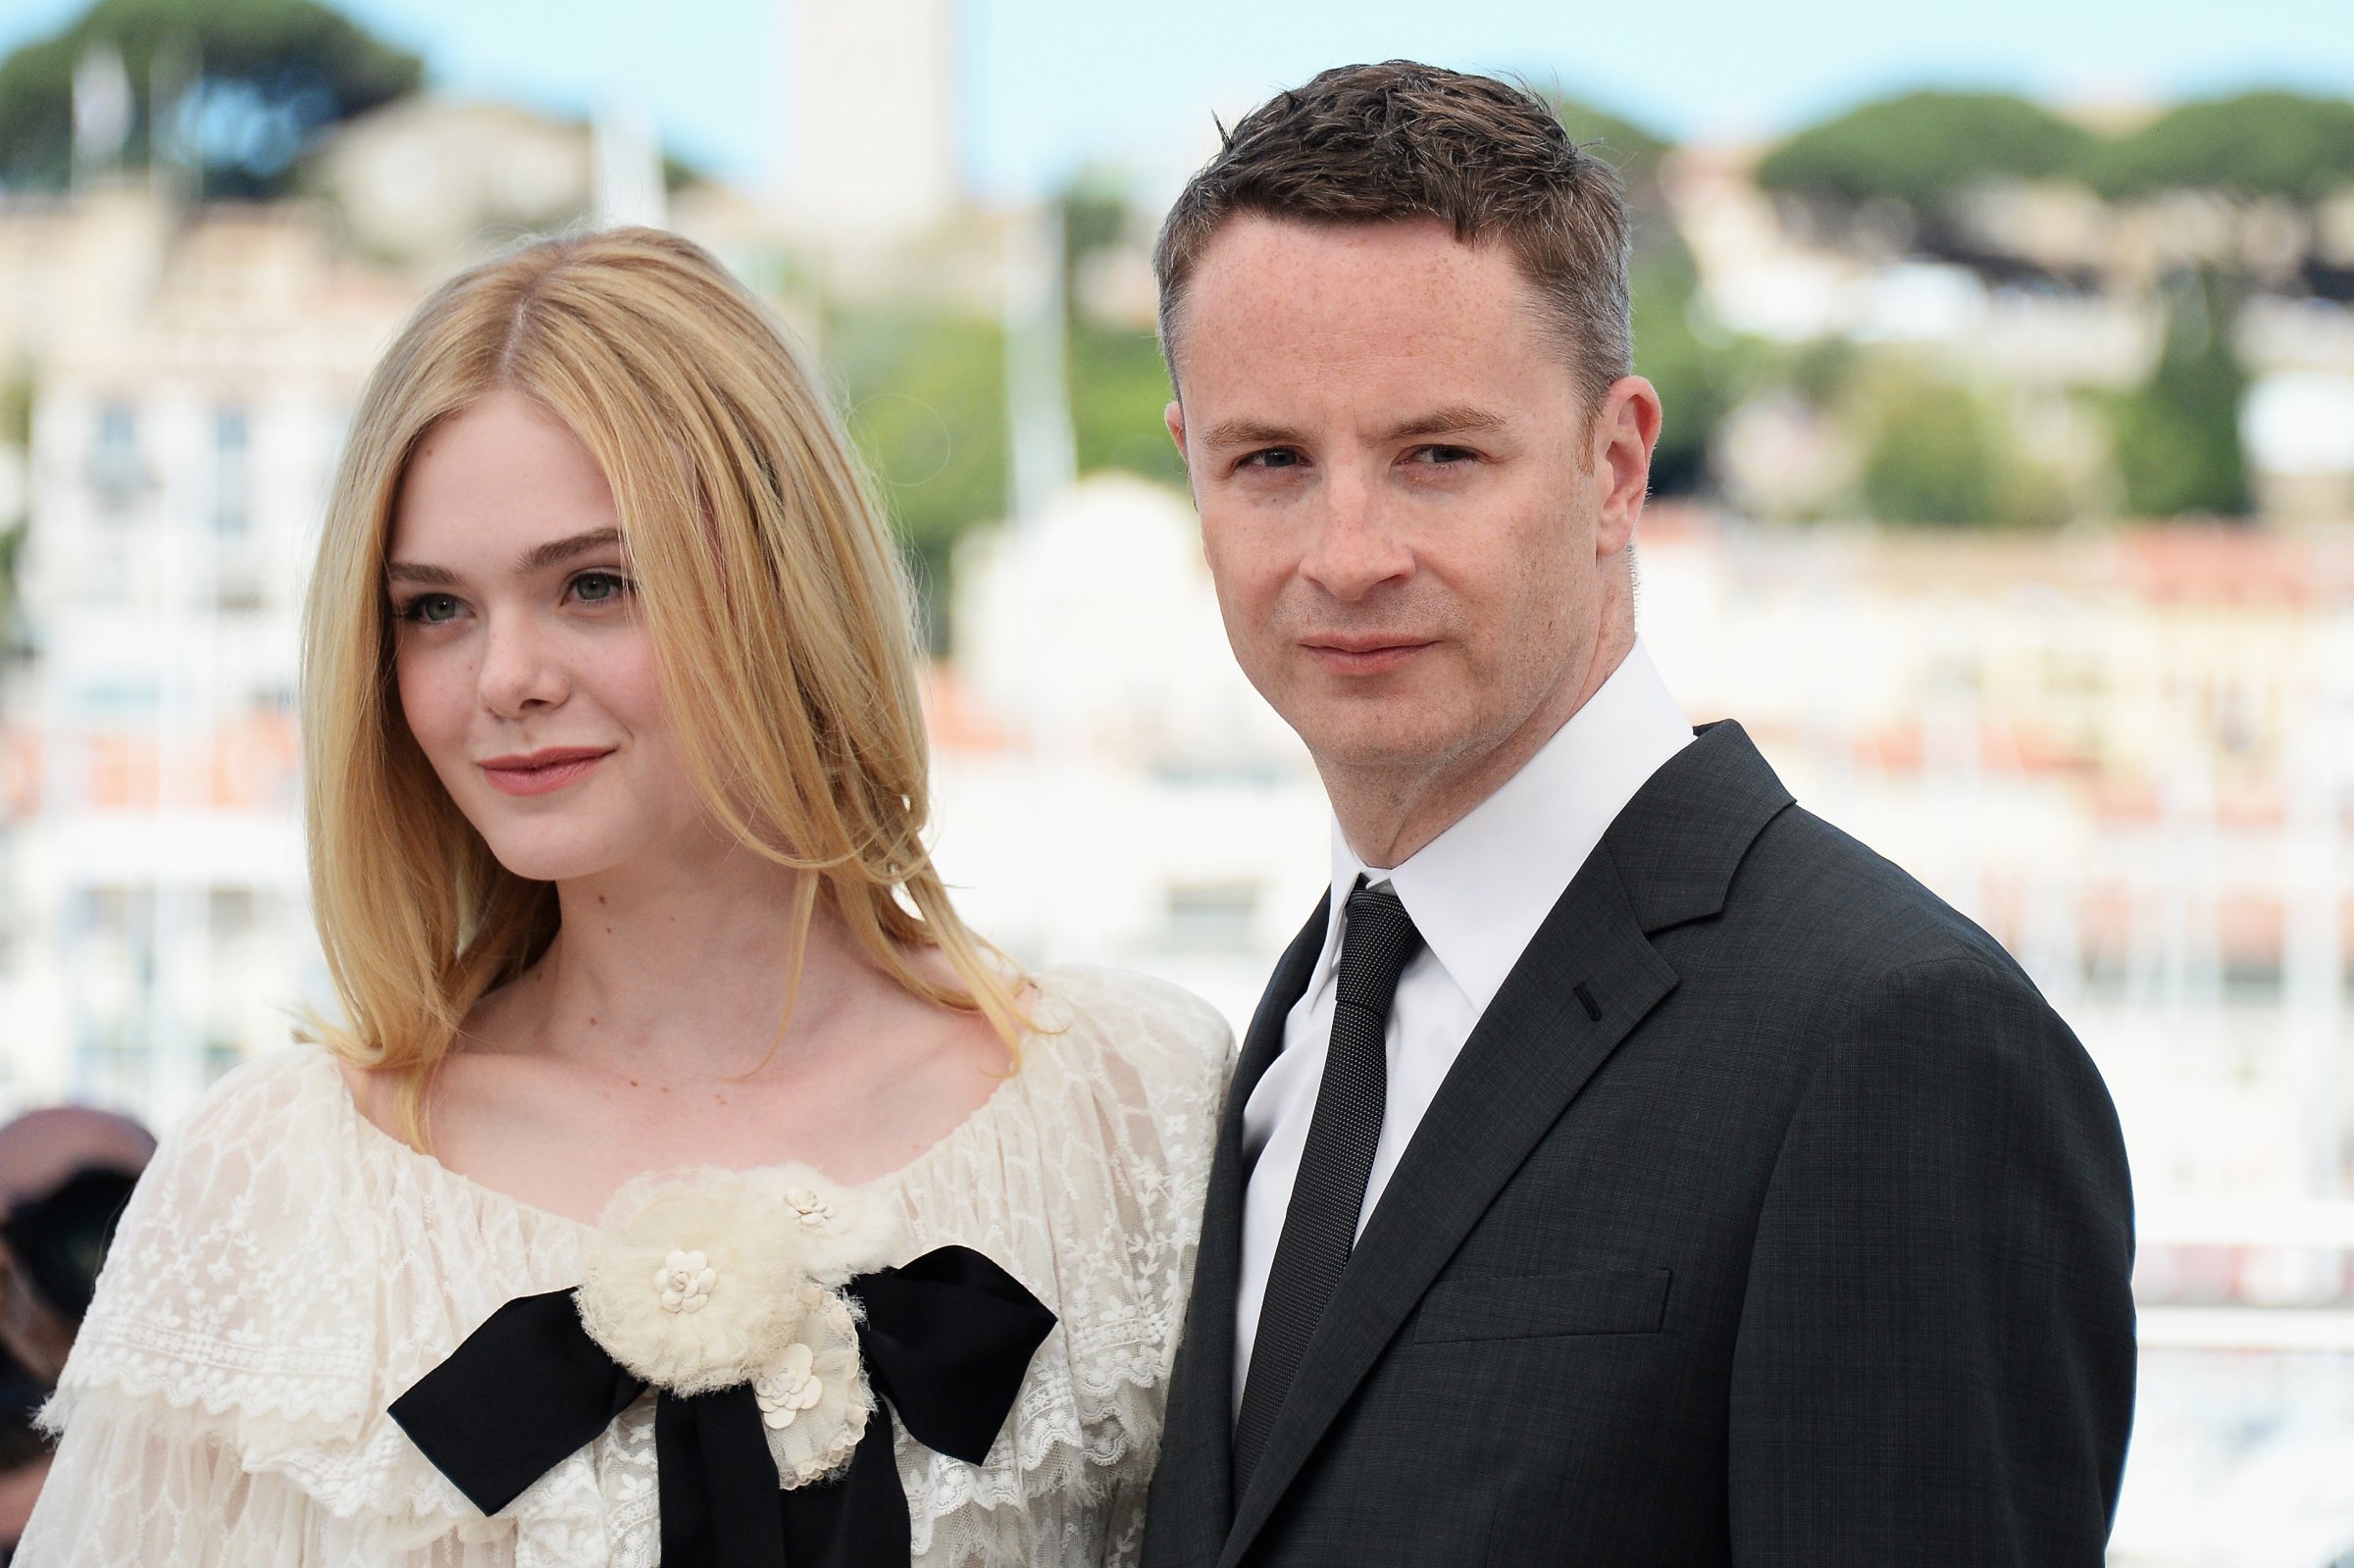 Elle Fanning and director Nicolas Winding Refn during the 69th annual Cannes Film Festival at the Palais des Festivals on May 20, 2016 in Cannes, France.